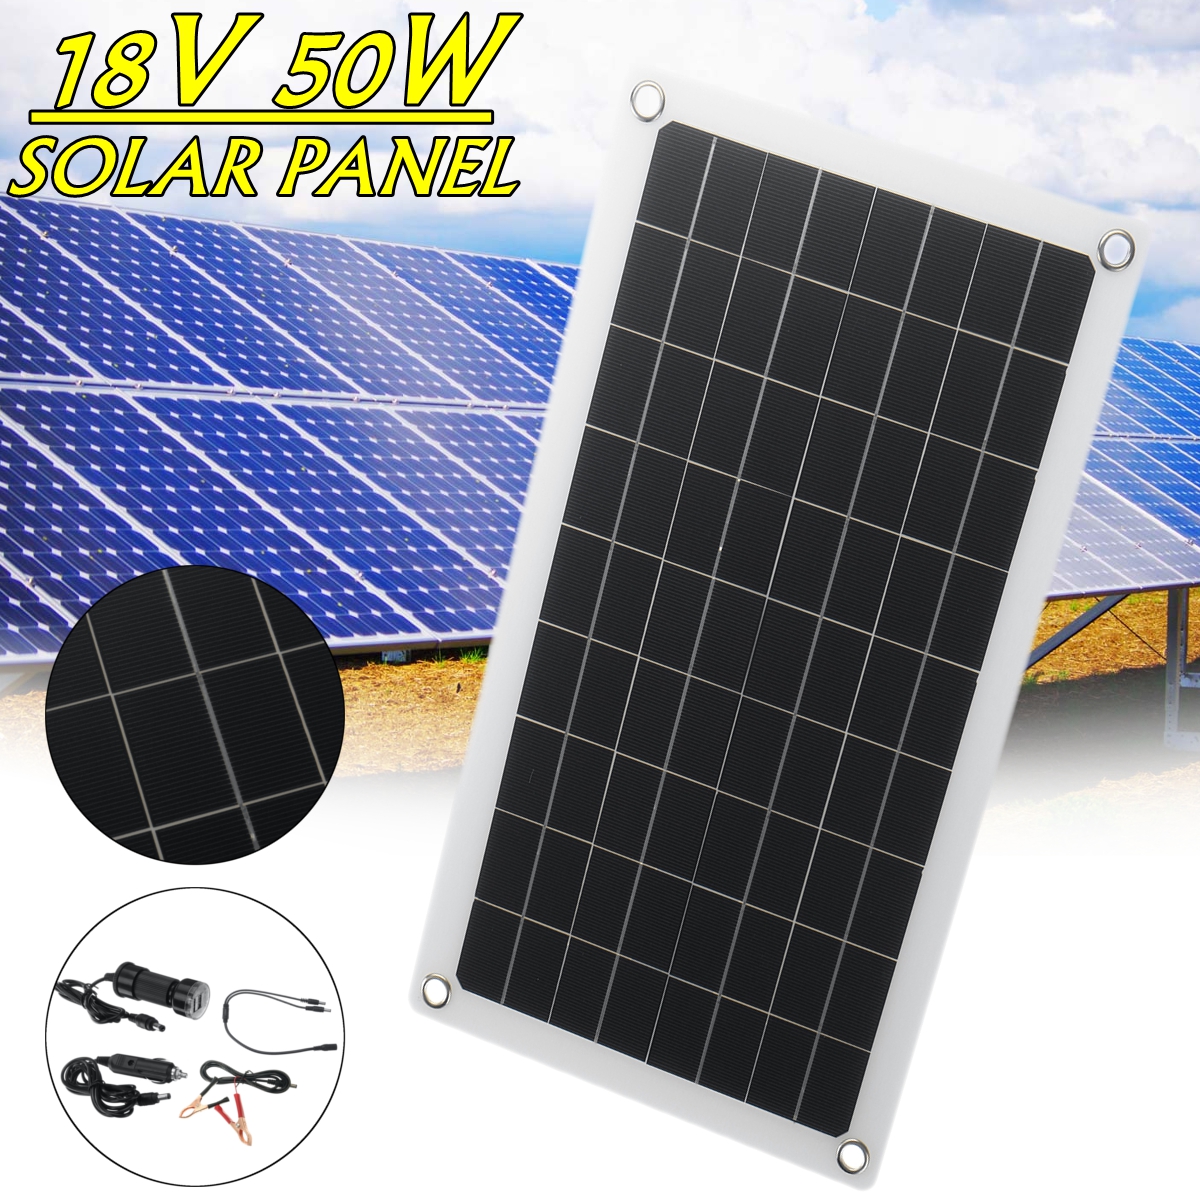 50W-18V-Solar-Panel-Monocrystalline-Silicon-Battery-Charger-Kit-for-Car--Small-Household-Appliances-1778301-2